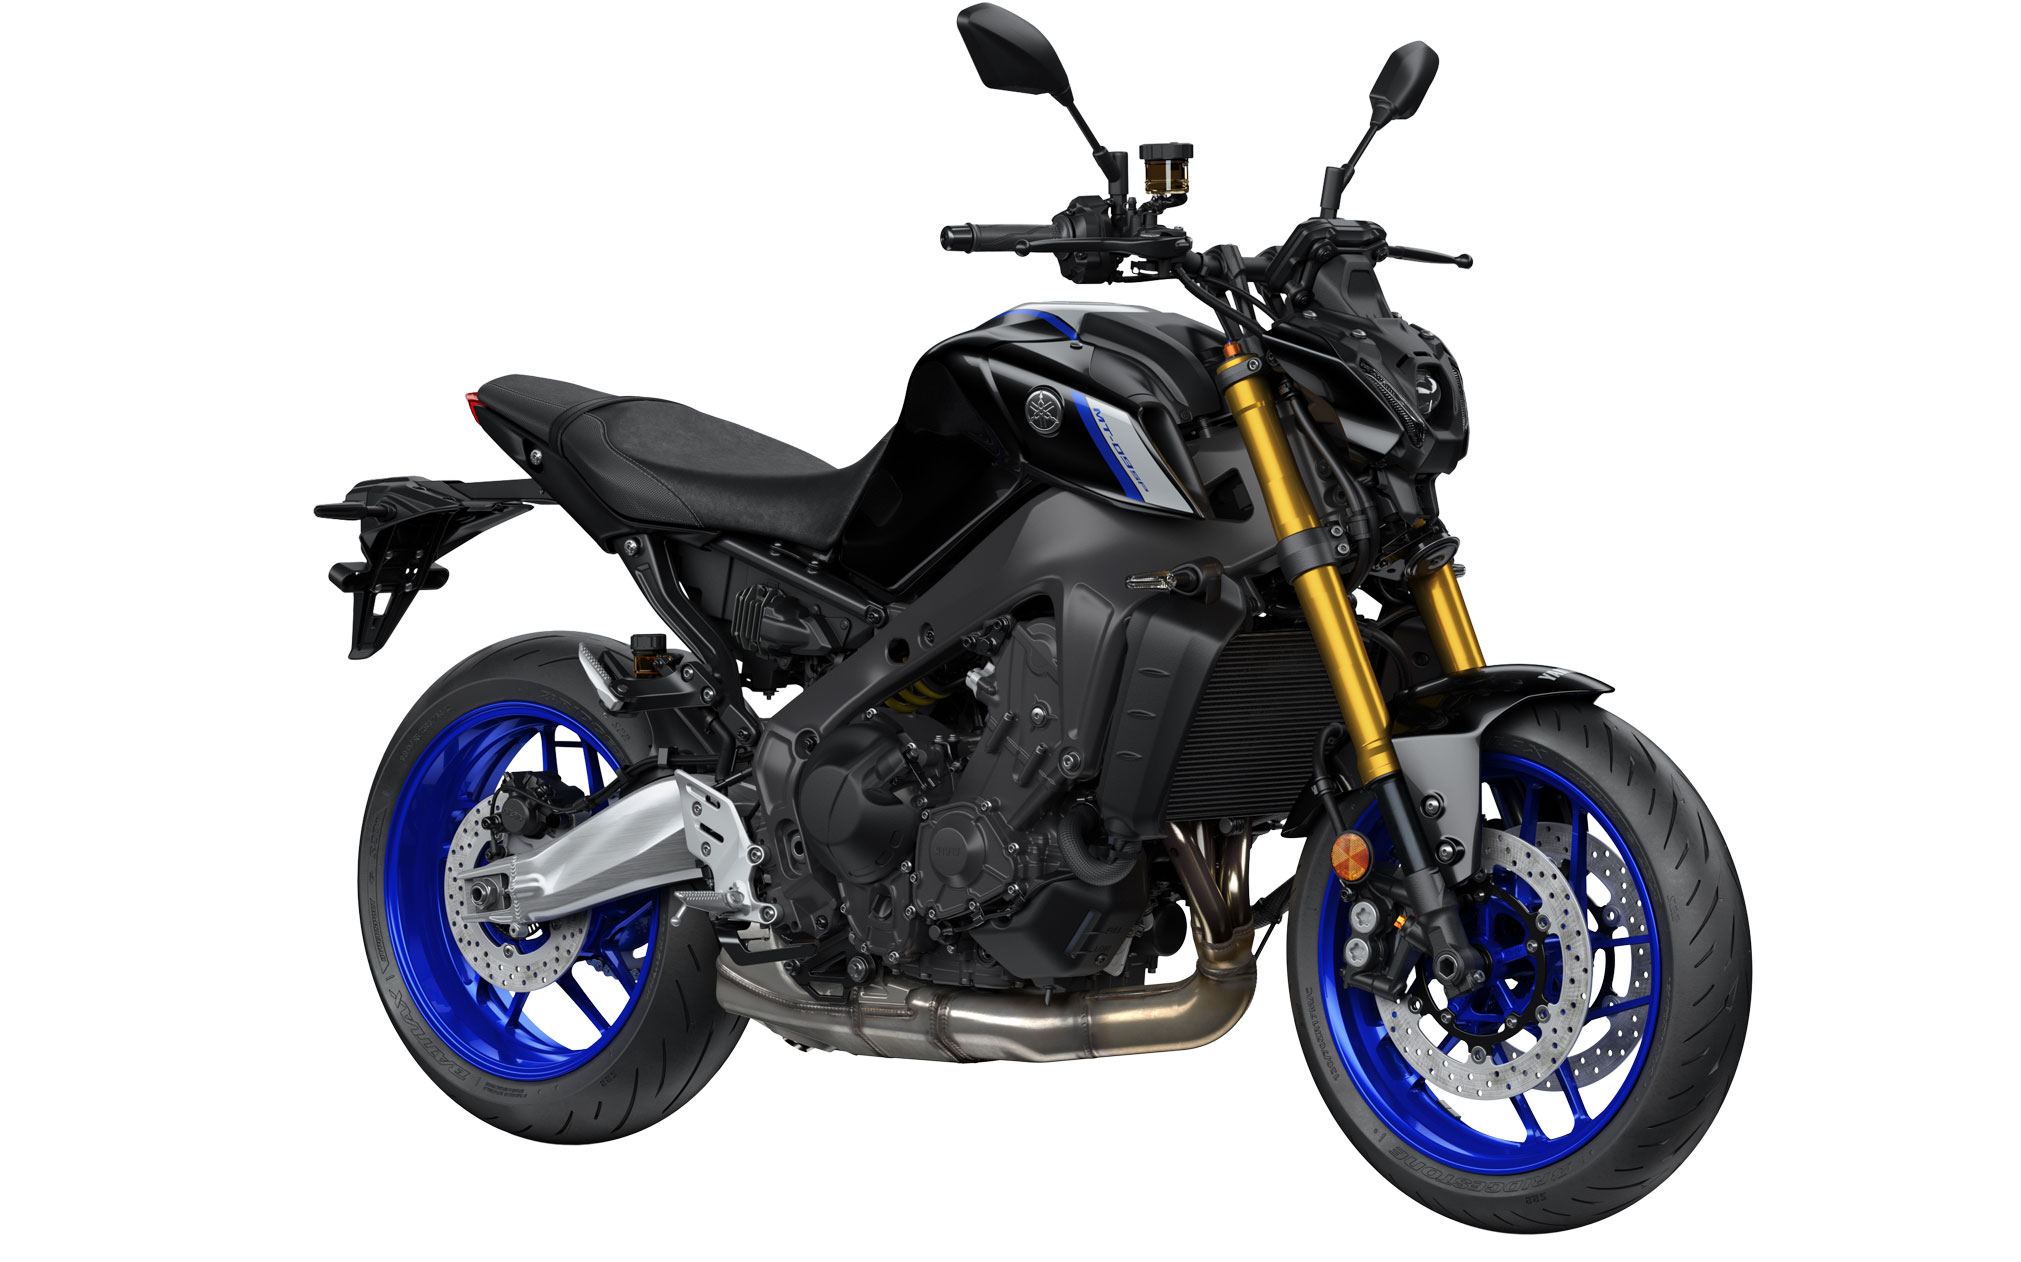 2021 Yamaha MT-09 SP Guide • Total Motorcycle